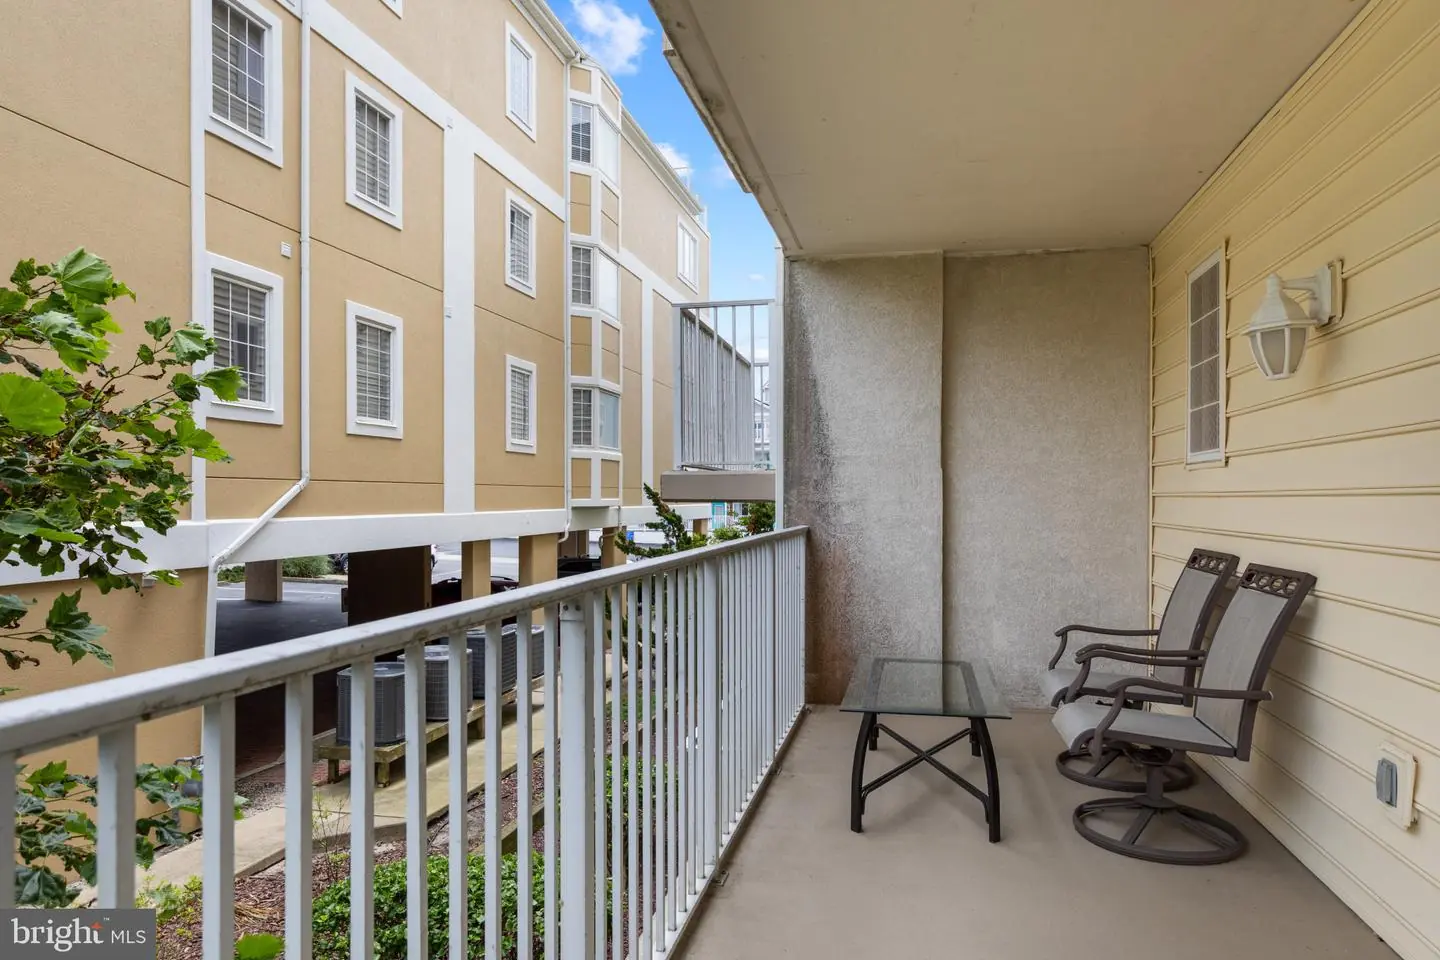 MDWO2015322-802498056052-2024-04-16-15-31-31 14 45th St #203 | Ocean City, MD Real Estate For Sale | MLS# Mdwo2015322  - 1st Choice Properties